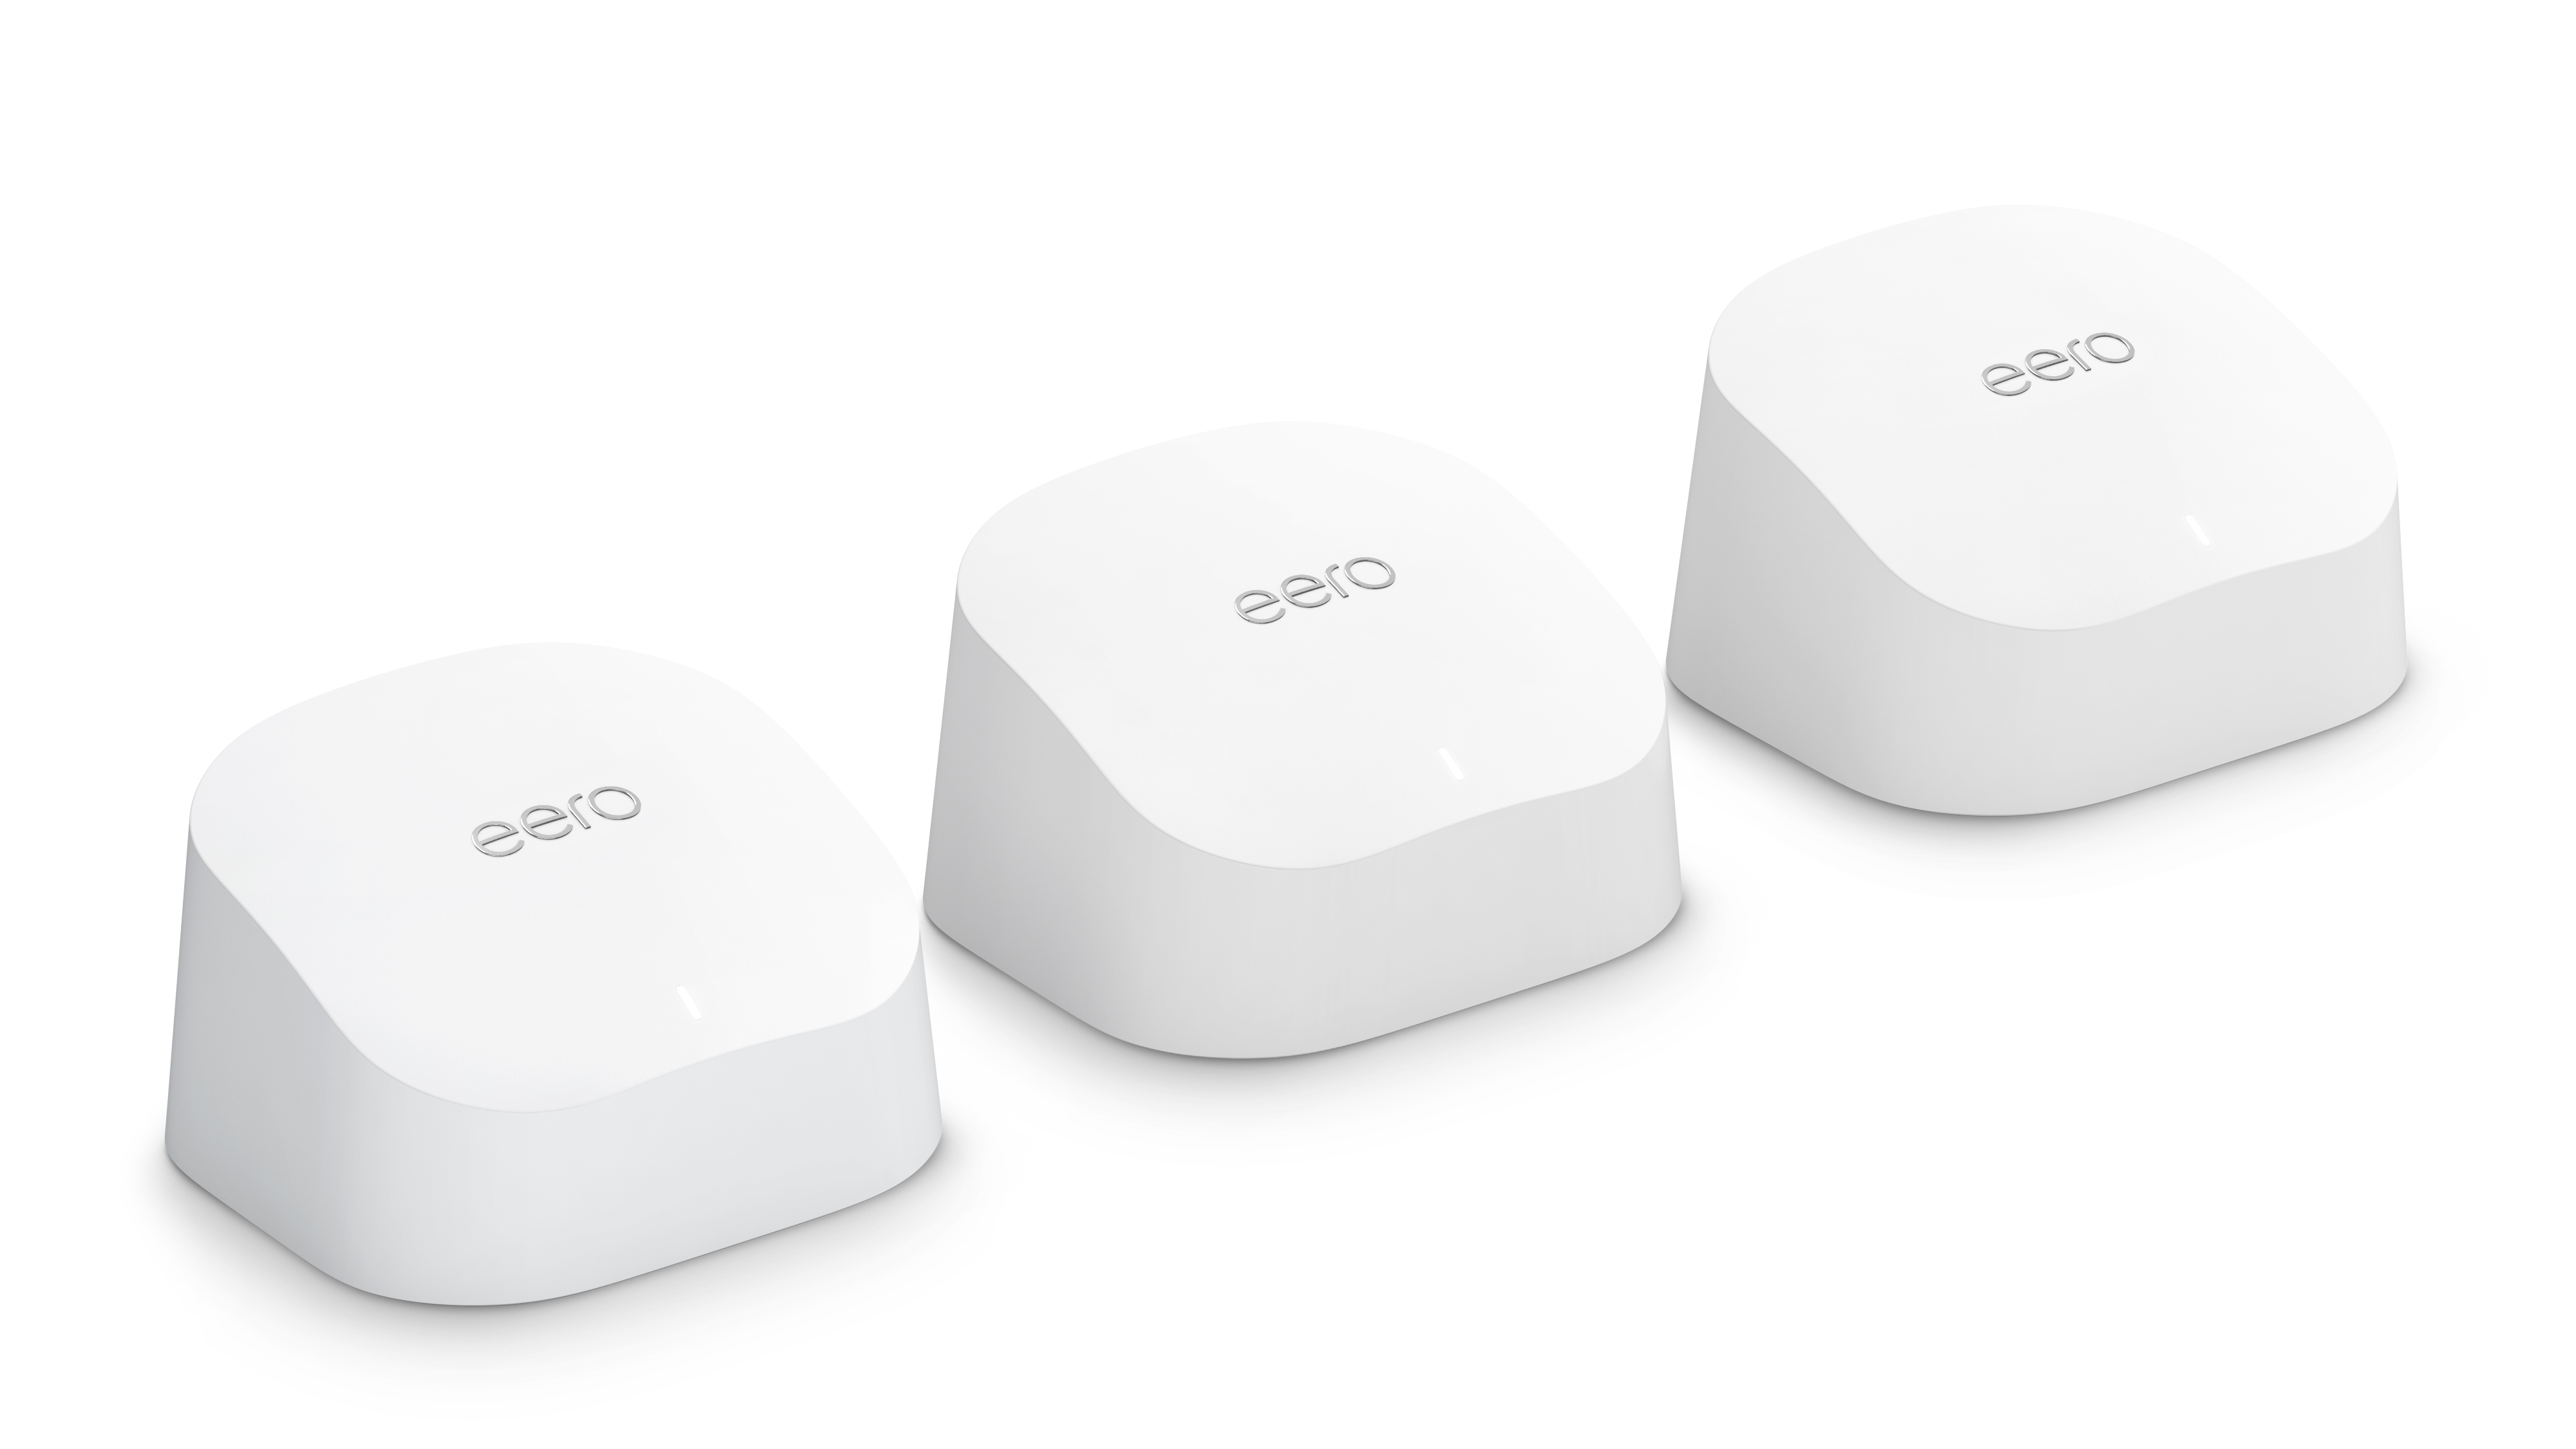 EXPIRED: Upgrade Your Internet with The Eero Mesh Wifi System, On Sale Today